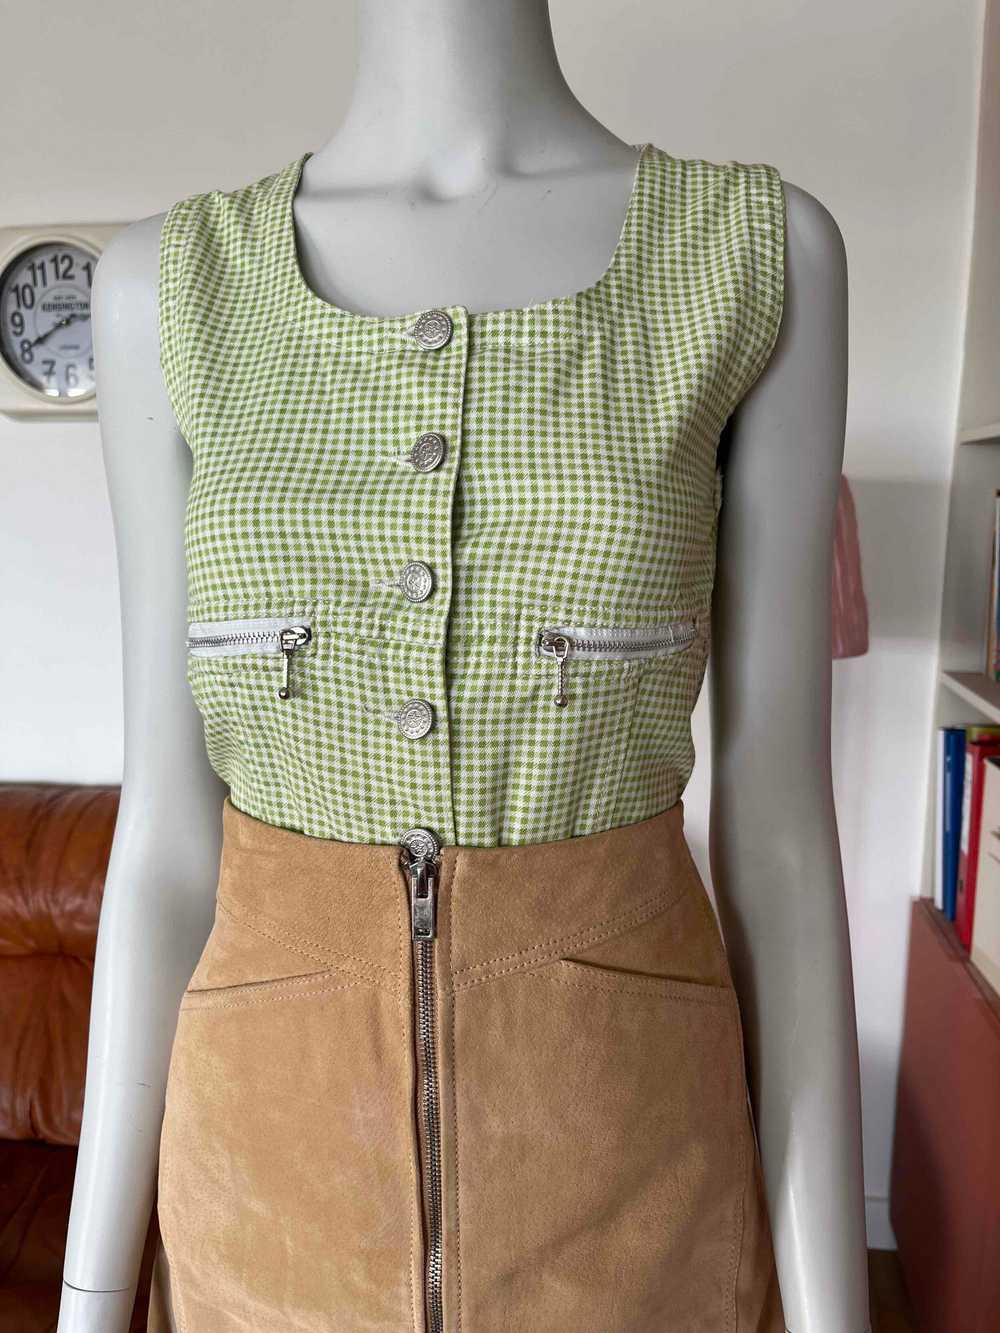 Gingham top - Green and white gingham top with bu… - image 3